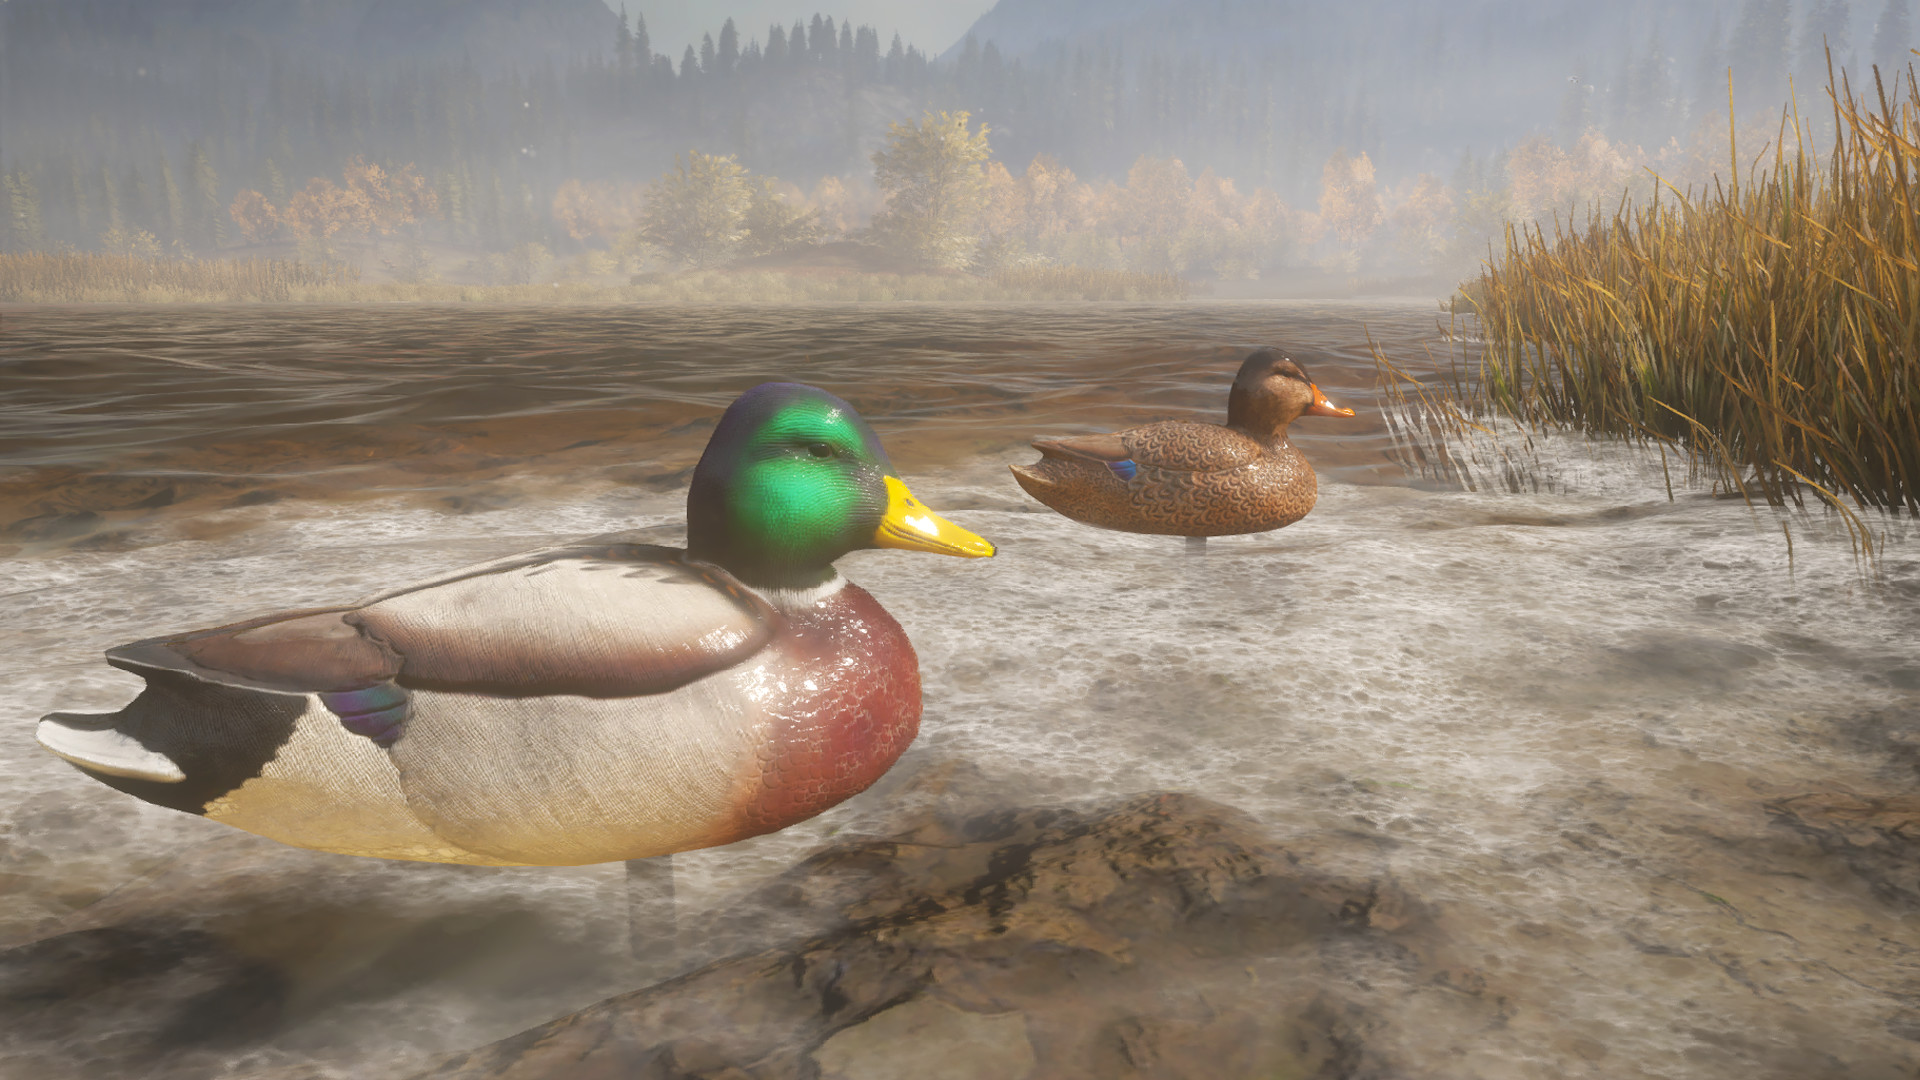 theHunter: Call of the Wild™ - Duck and Cover Pack | WW (491ba787-fe33-47ce-a95a-3e4252b68b26)